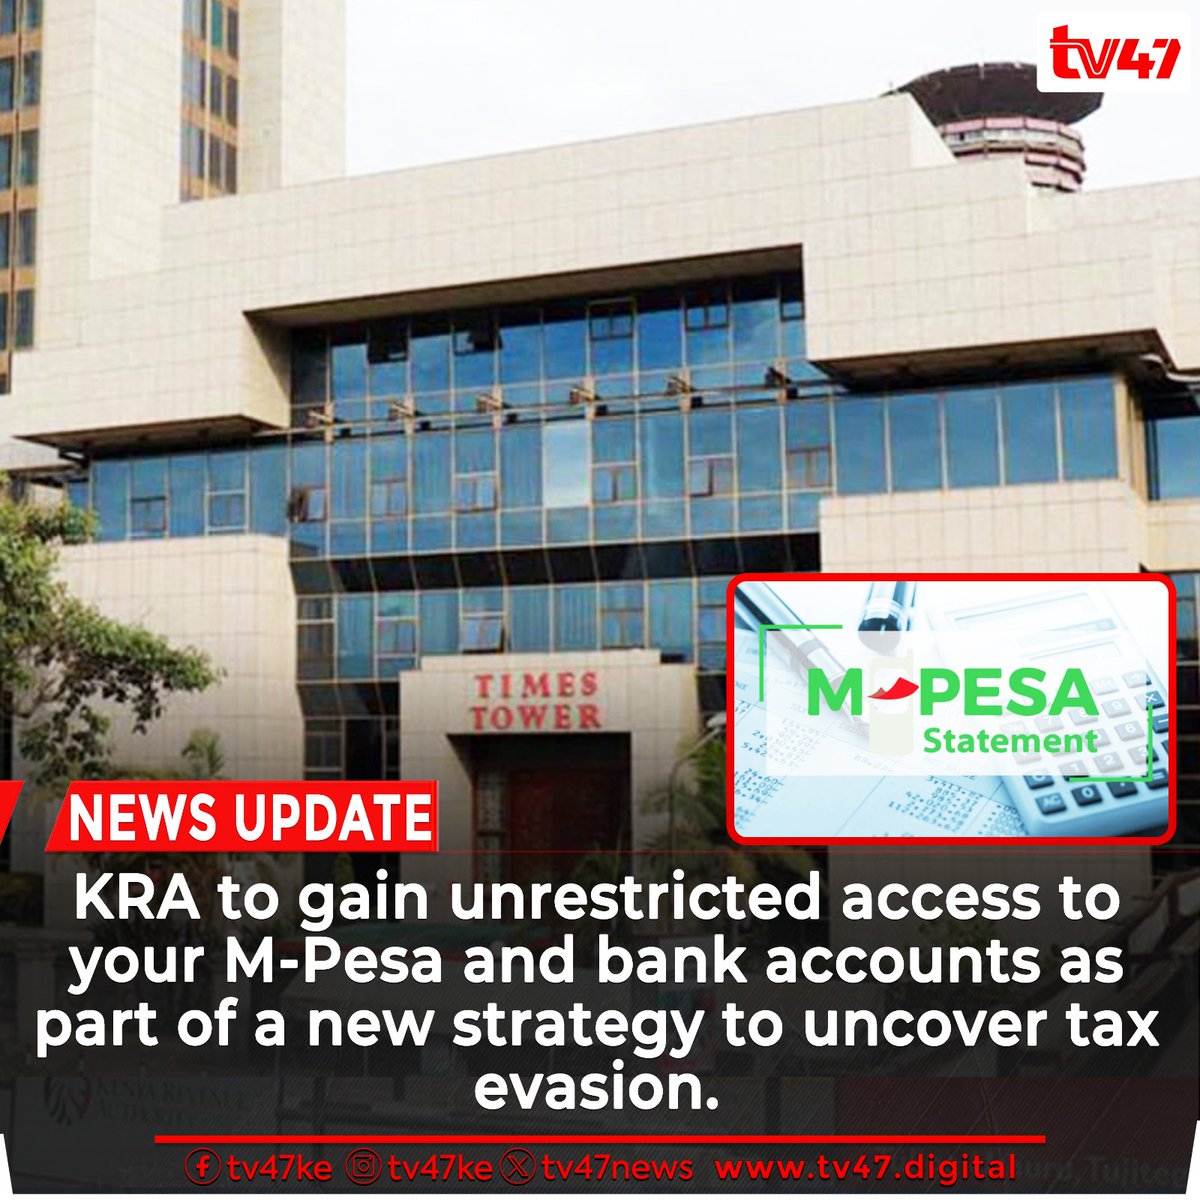 KRA to gain unrestricted access to your M-Pesa and bank accounts as part of a new strategy to uncover tax evasion. This means KRA could monitor transactions involving Paybills, bank accounts, and apps used for cash receipts by businesses and individuals. The government aims to